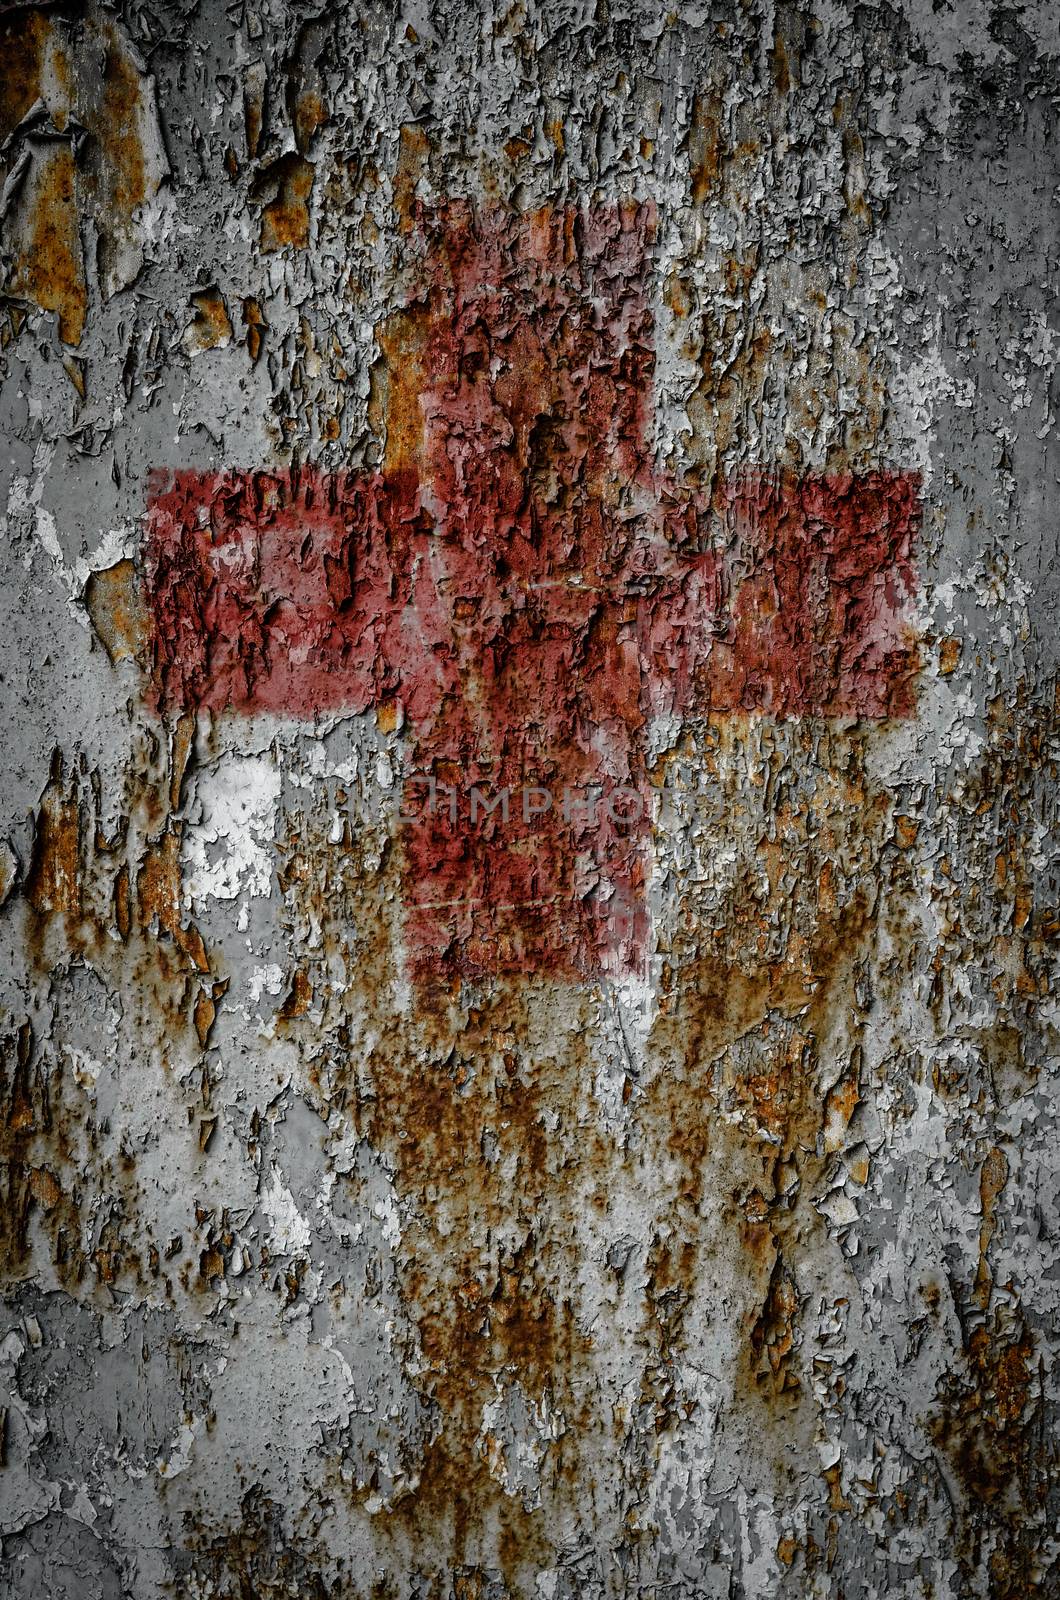 First Aid Symbol Sign On Rusty Background by mrdoomits